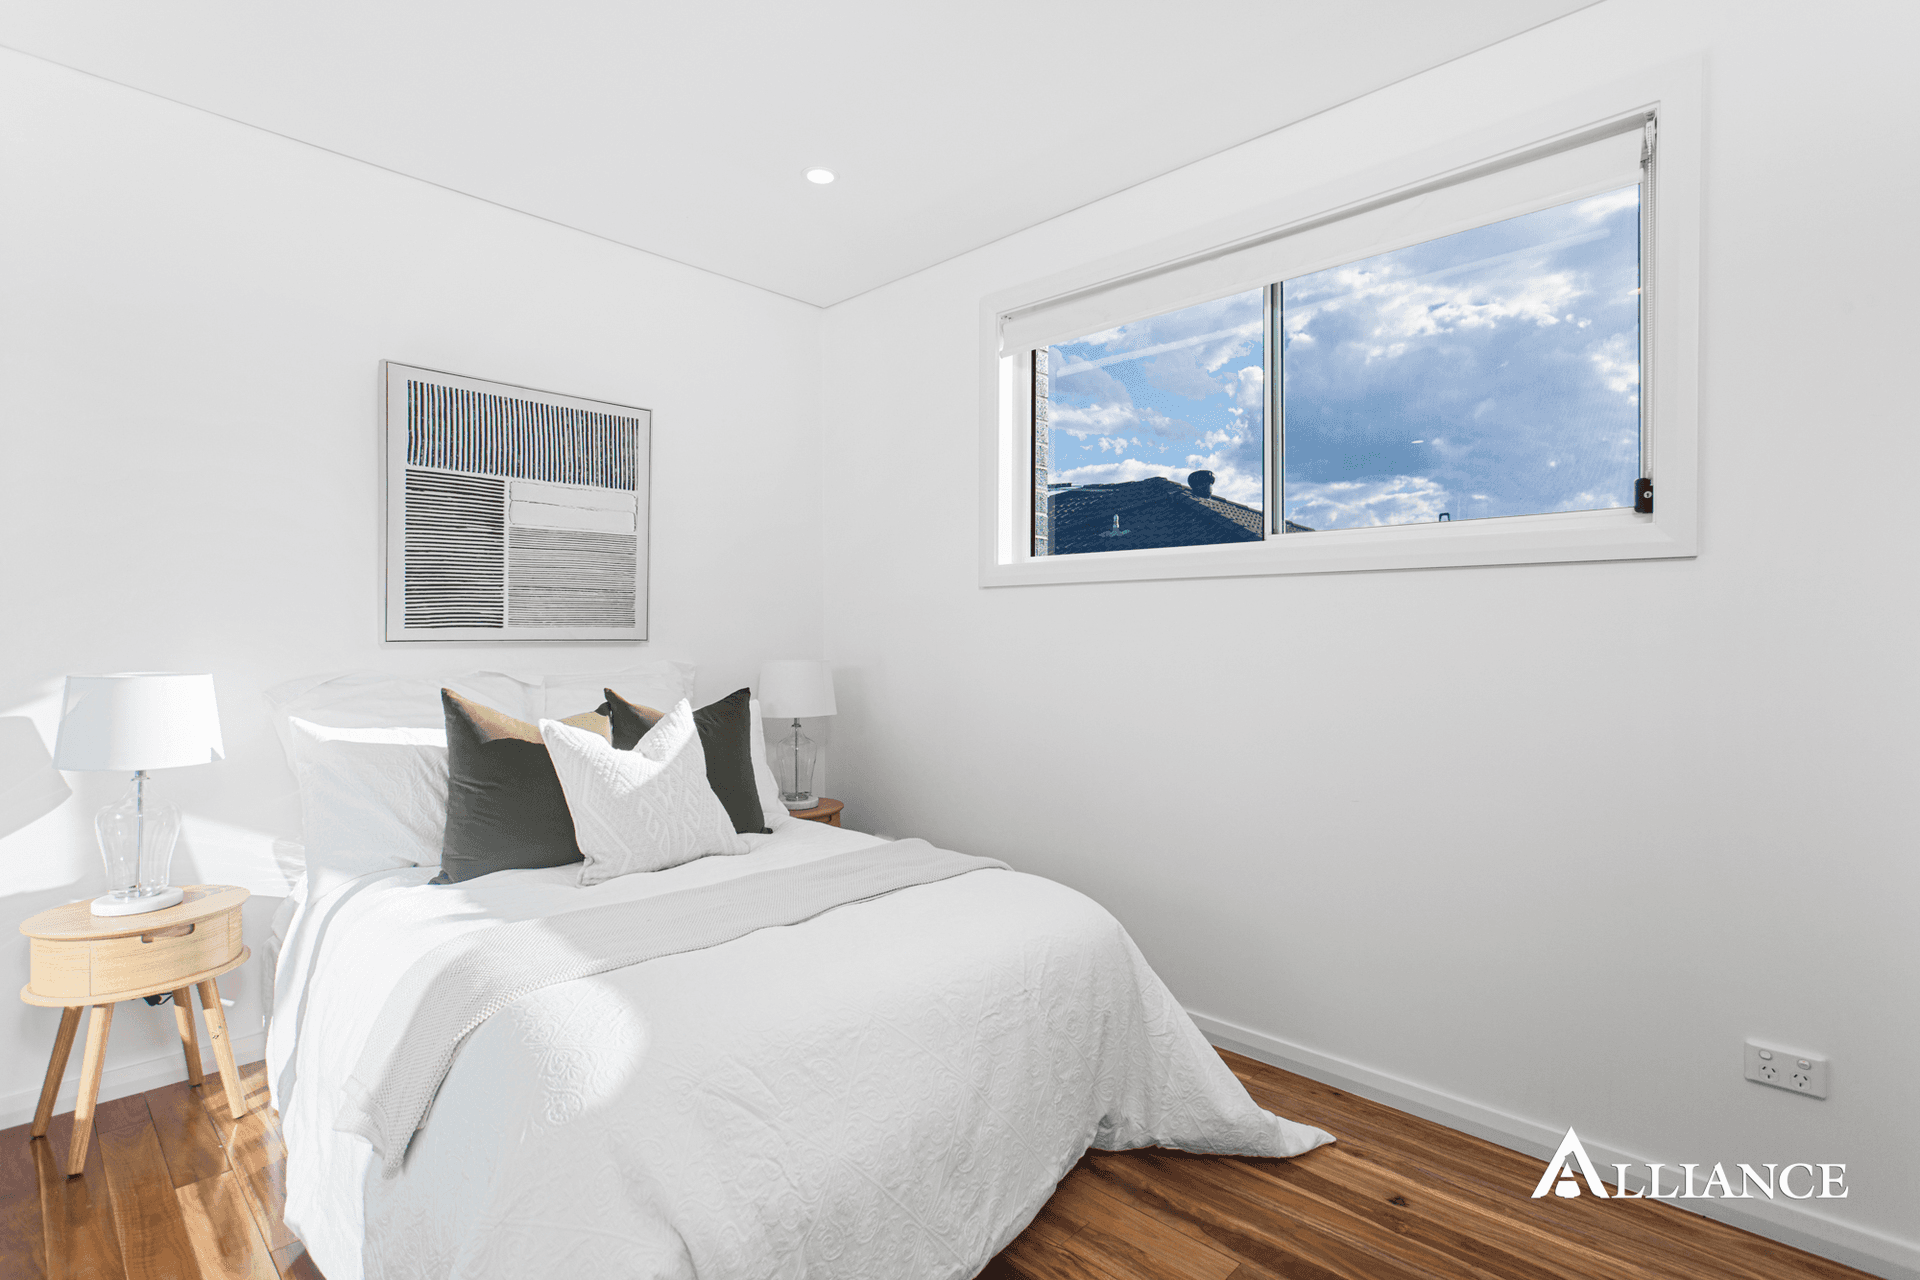 2B Alamein Road, Revesby Heights, NSW 2212